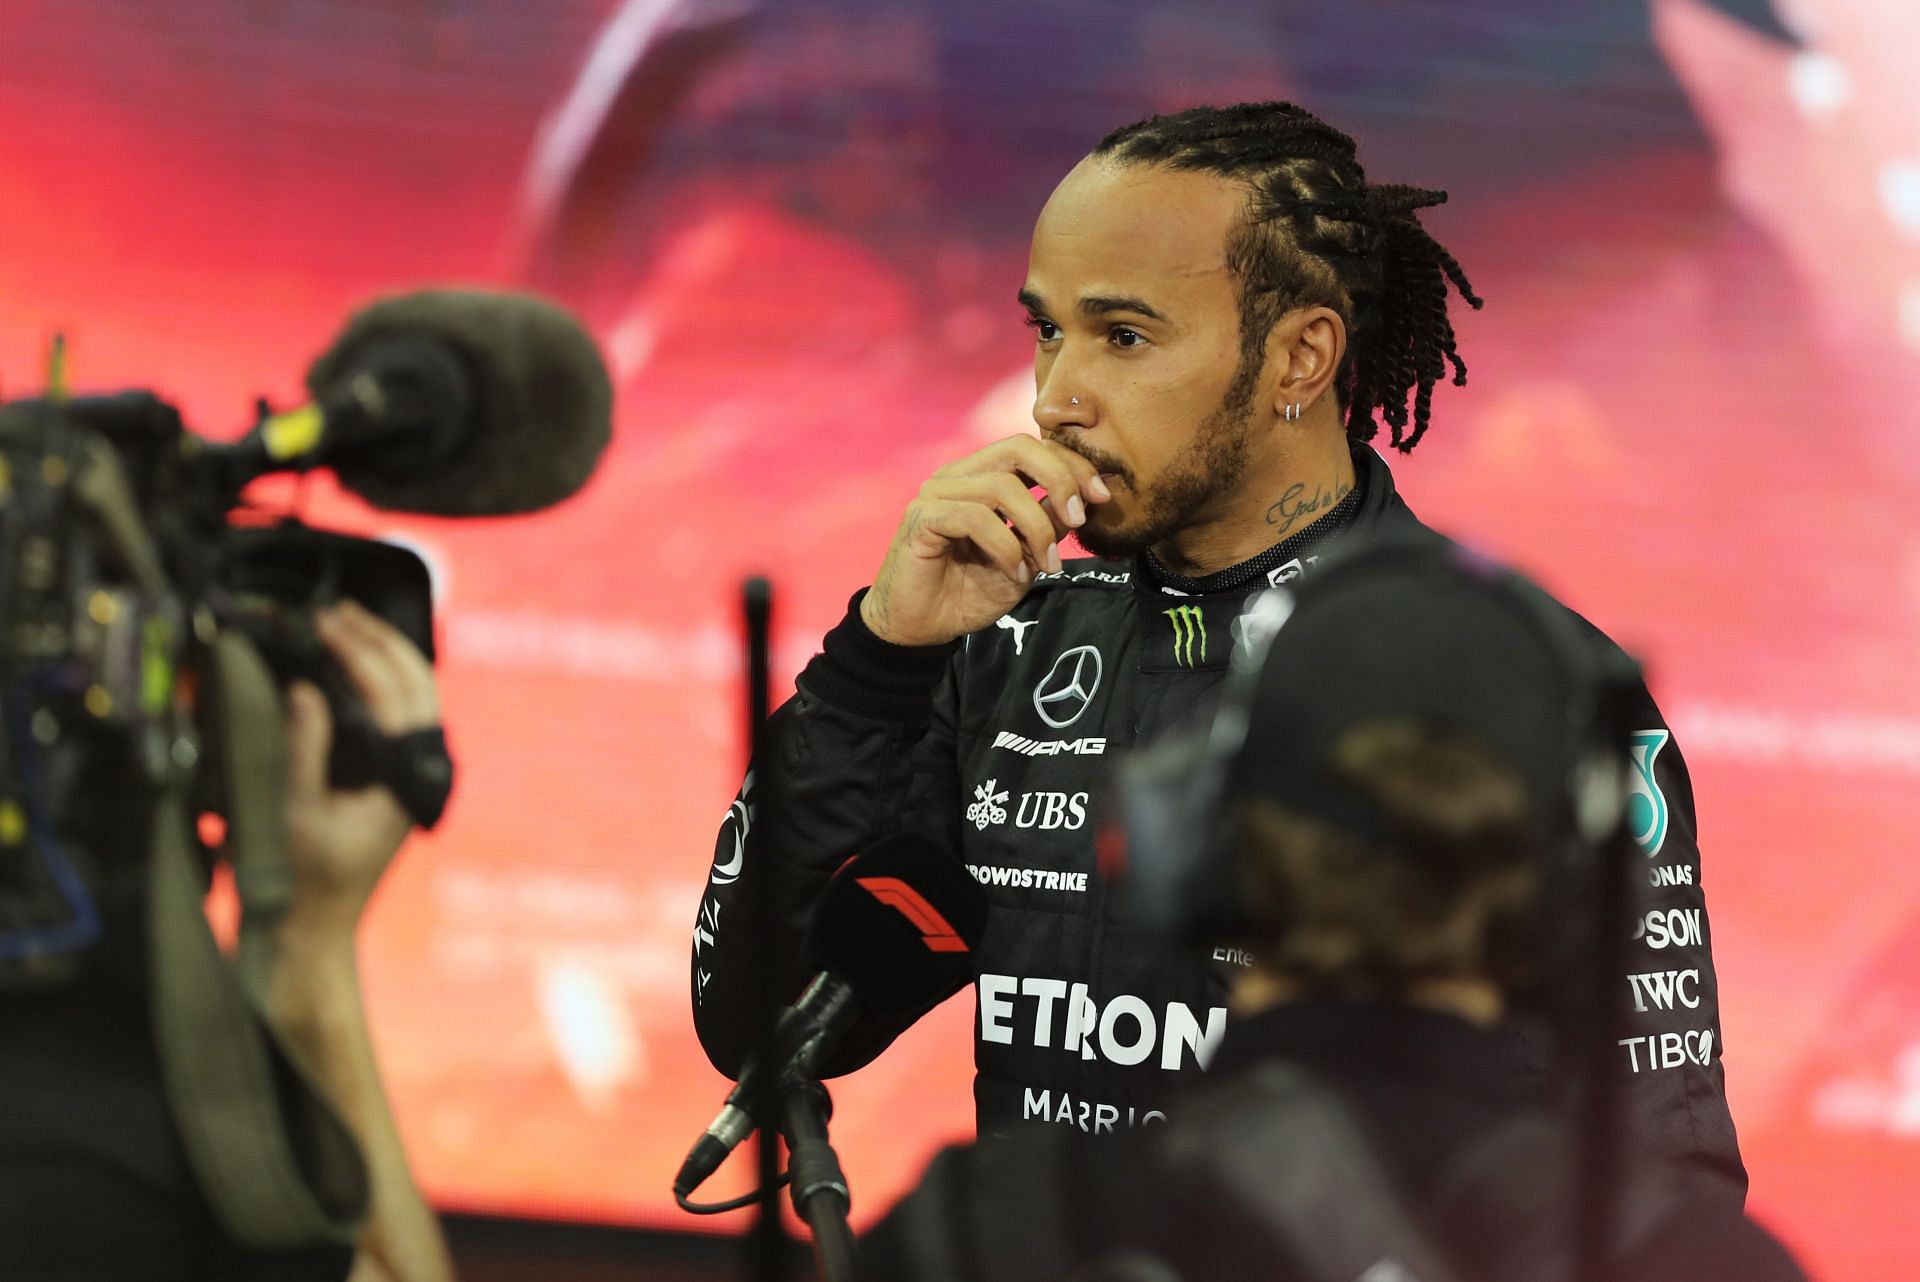 Lewis Hamilton is still maintaining silence from social media after what happened in Abu Dhabi in 2021